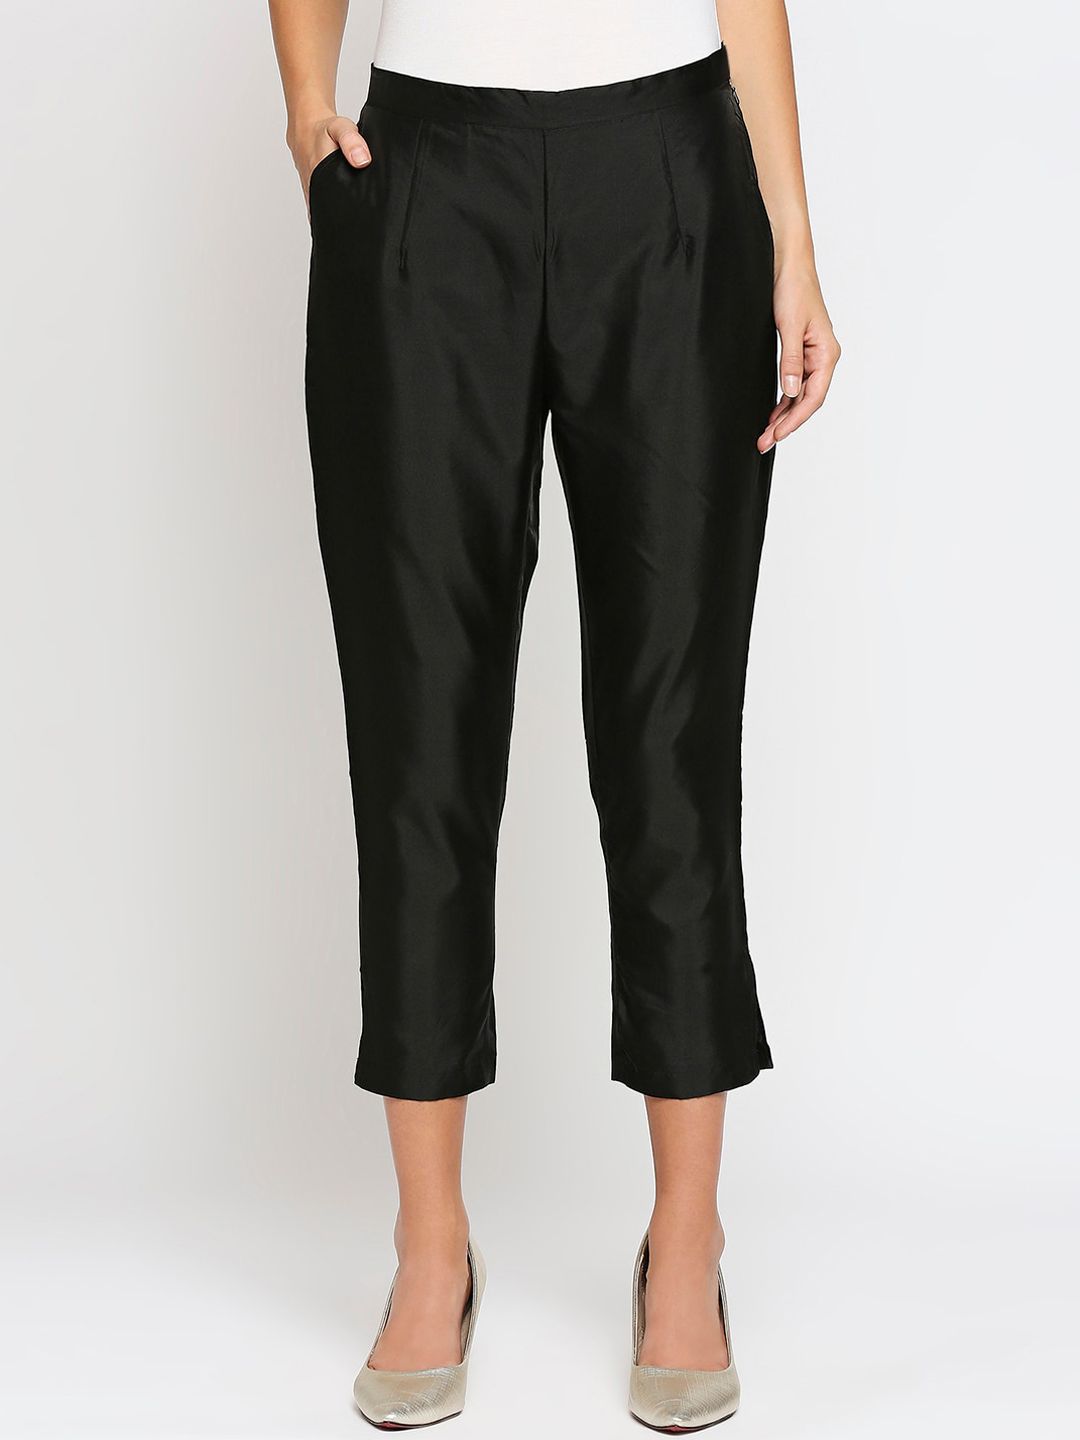 Ira Soleil Women Black Mid Rise Cropped Trousers Price in India